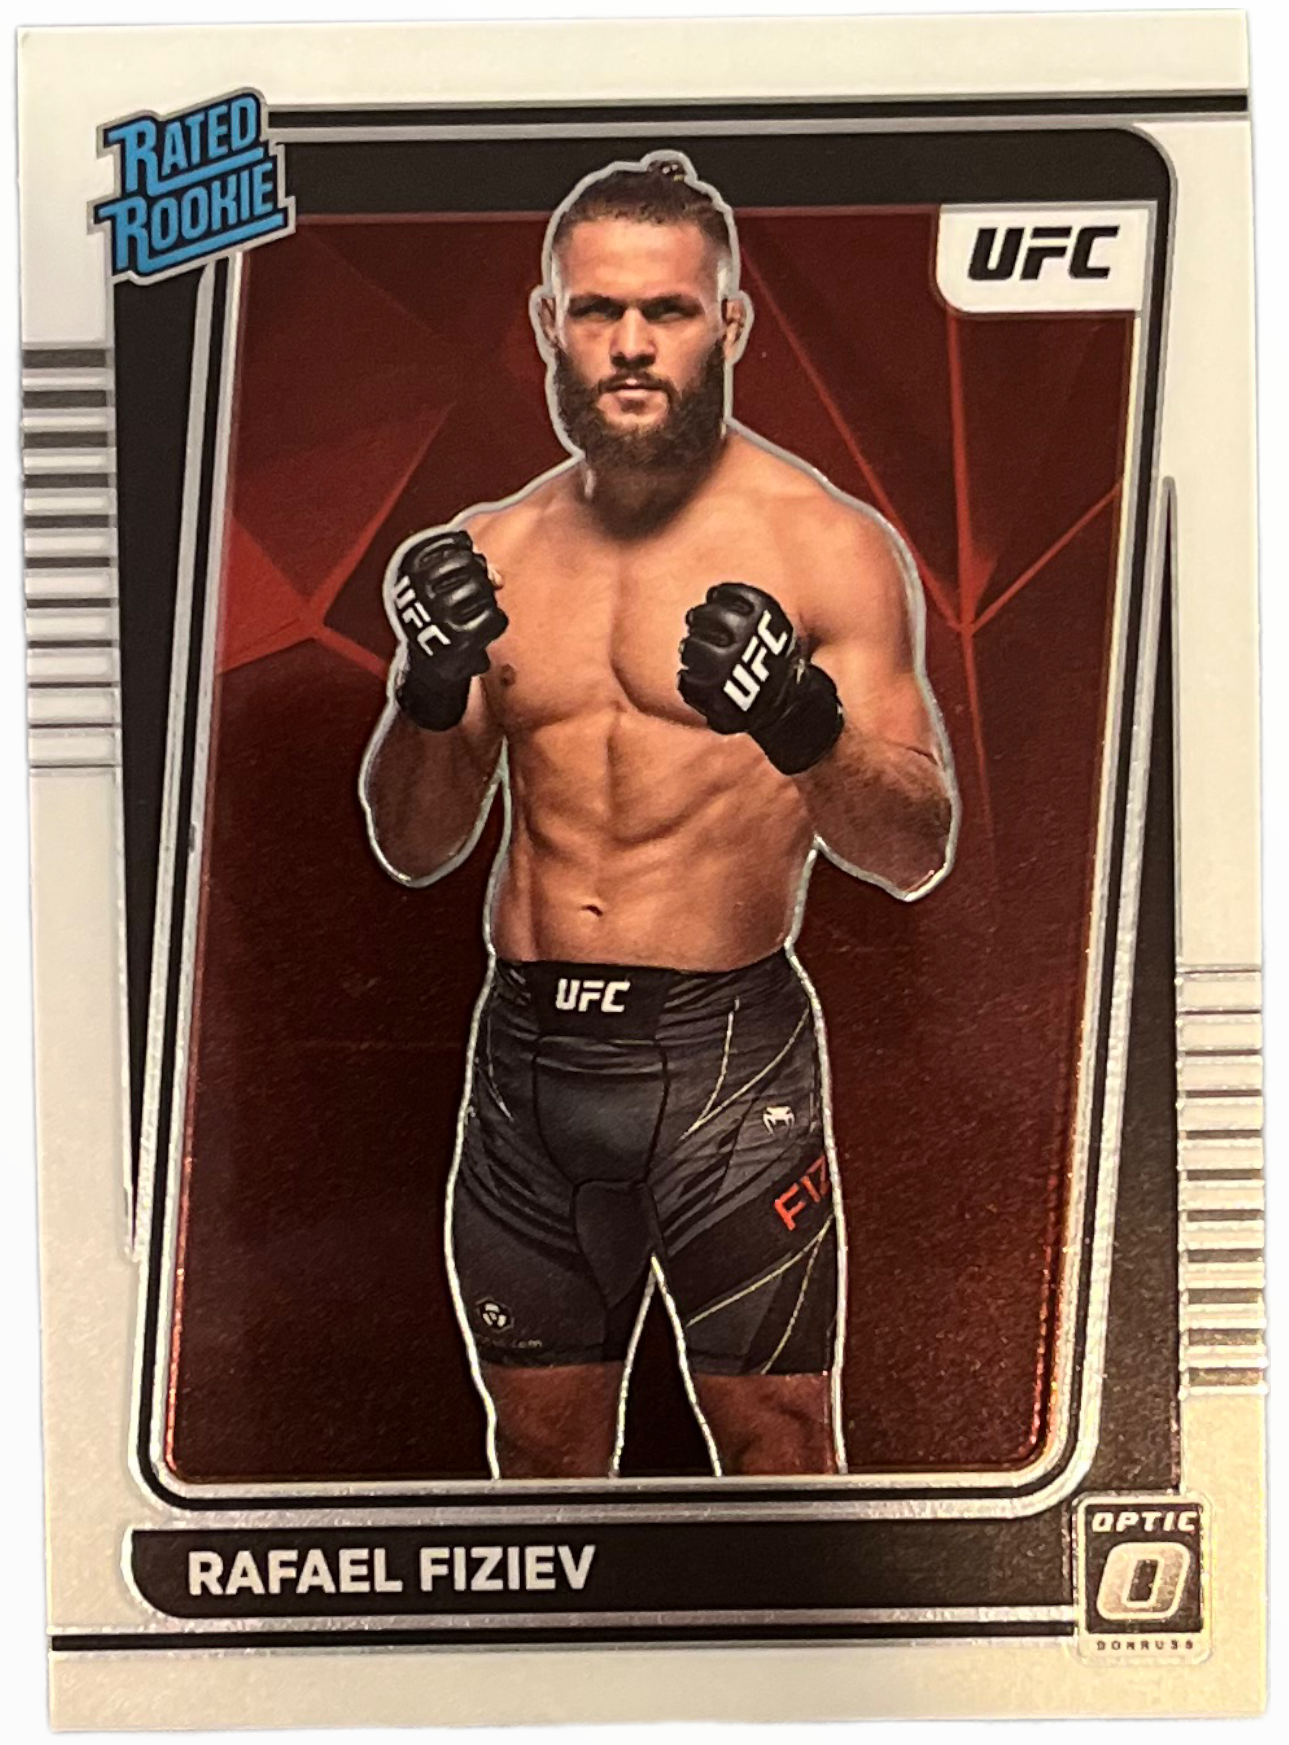 Rafael Fiziev - Base Set #116 (Rated Rookie) - UFC 2022 Donoruss Optic 0 - MMA - Mint Condition